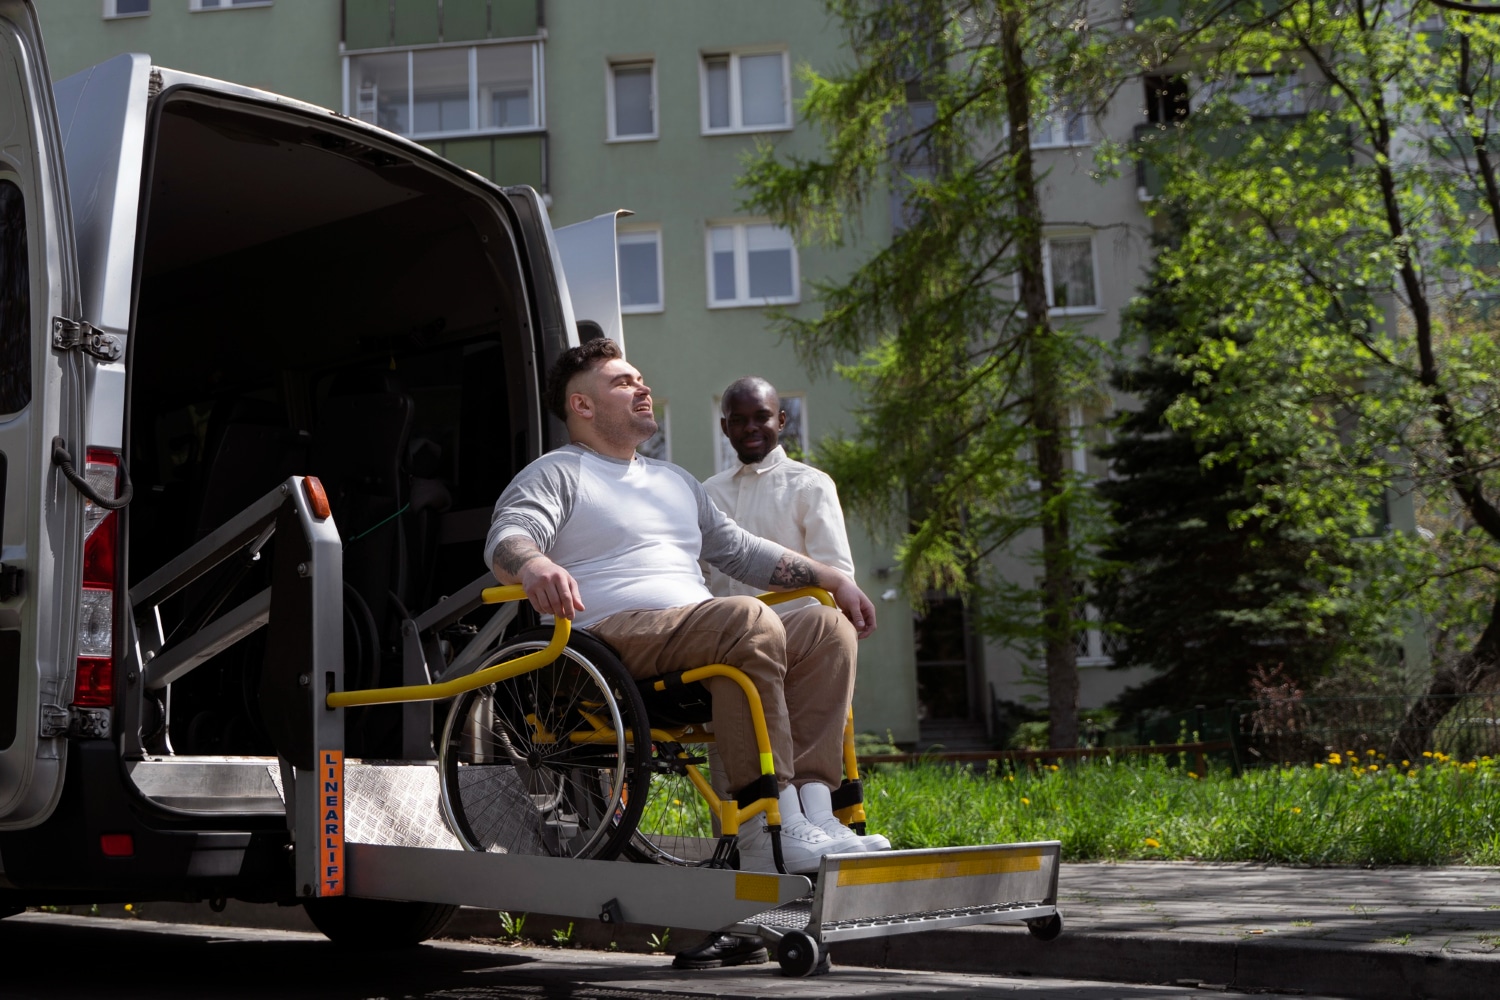 Since wheelchairs come in all shapes and sizes, it's important to know what exactly you're transporting.